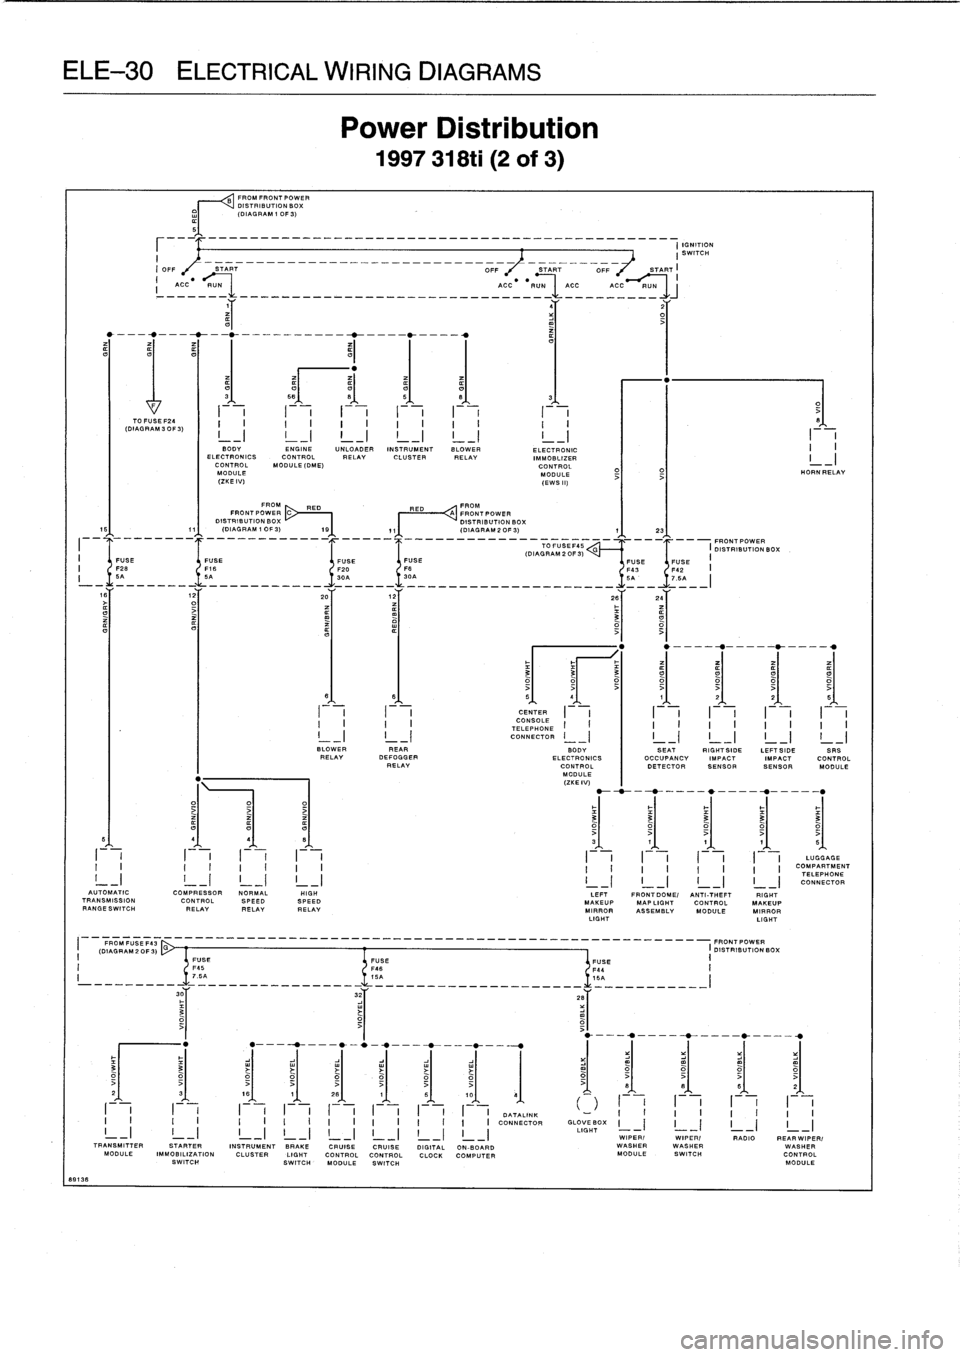 BMW M3 1994 E36 Service Manual 
ELE-30
ELECTRICAL
WIRING
DIAGRAMS

I
ACC
-R=_
____-____-______________
ACC
-
RUN

	

ACC
-_-C~

4Y

	

2Y

I

	

I

TO
FUSE
F24
(DIAGRAM
30F
3)

FROM
FRONT
POWER
DISTRIBUTION
BOX
(DIAGRAM
1
0F3)
IGNI